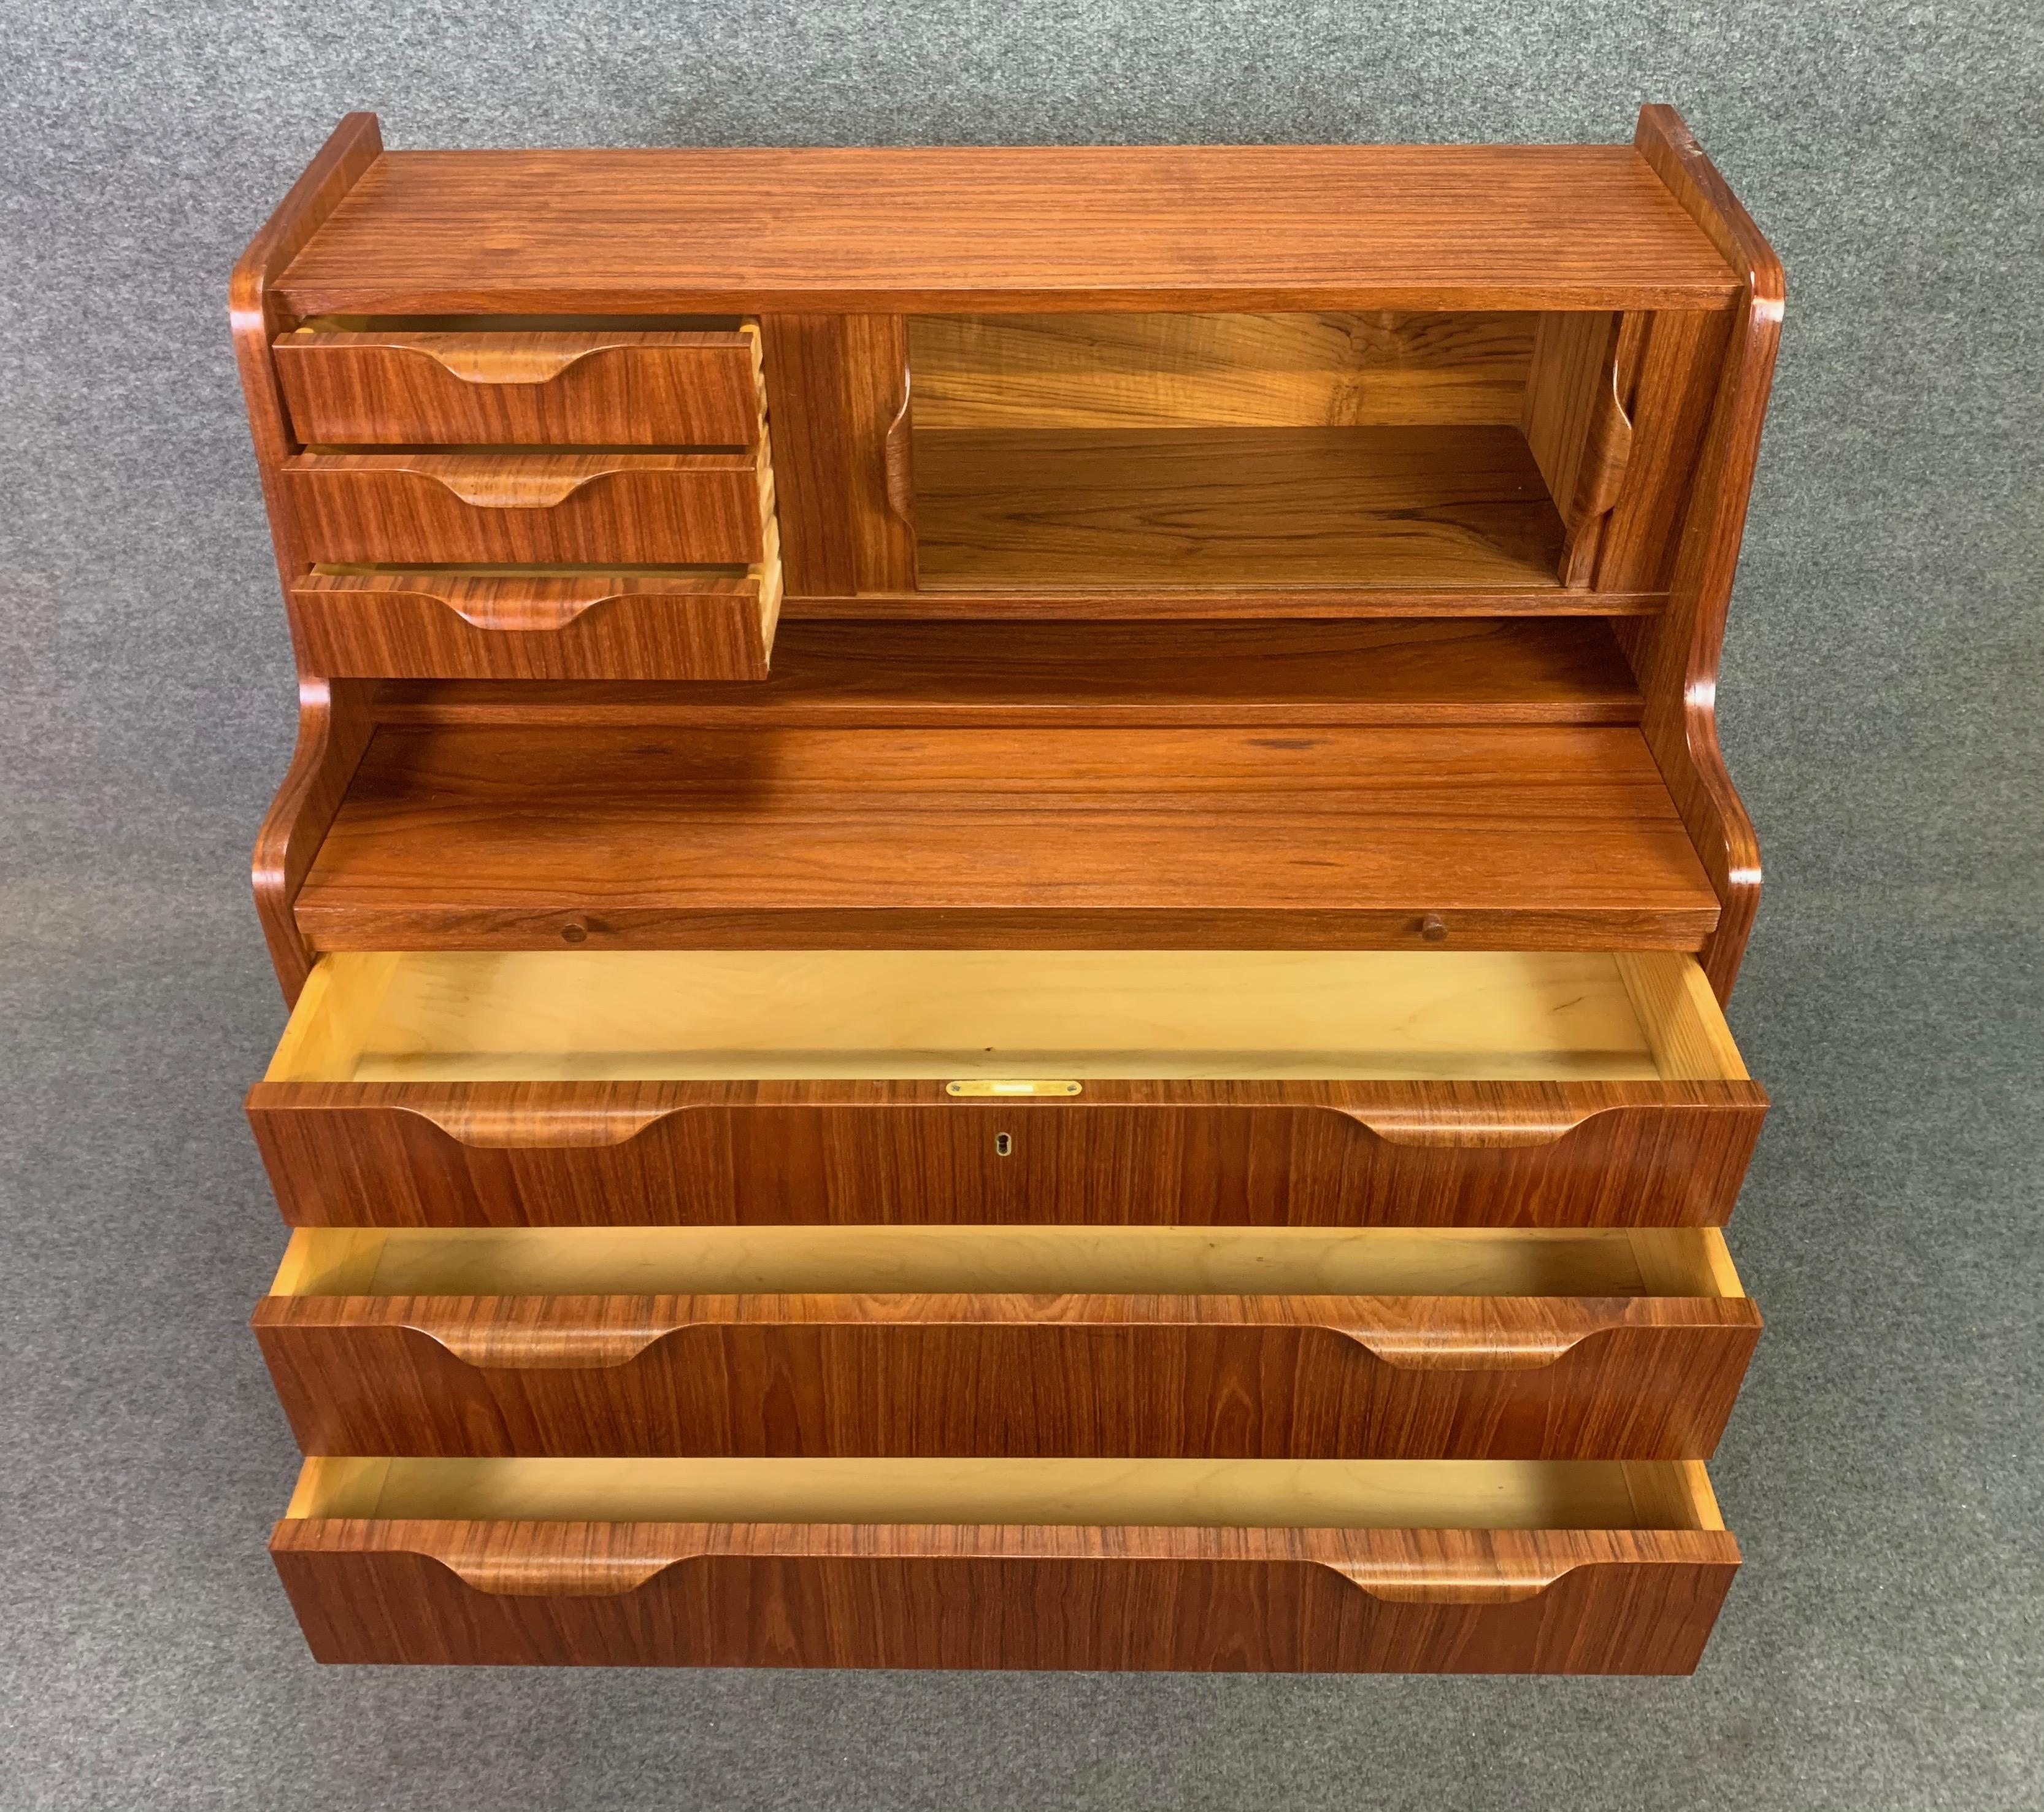 Here is a beautiful 1960s Scandinavian Modern secretary desk in teak reminiscent of Johannes Andersen's design for Uldum Mobelfabrik.
This exquisite case piece, recently imported from Denmark to California before its restoration, features at its